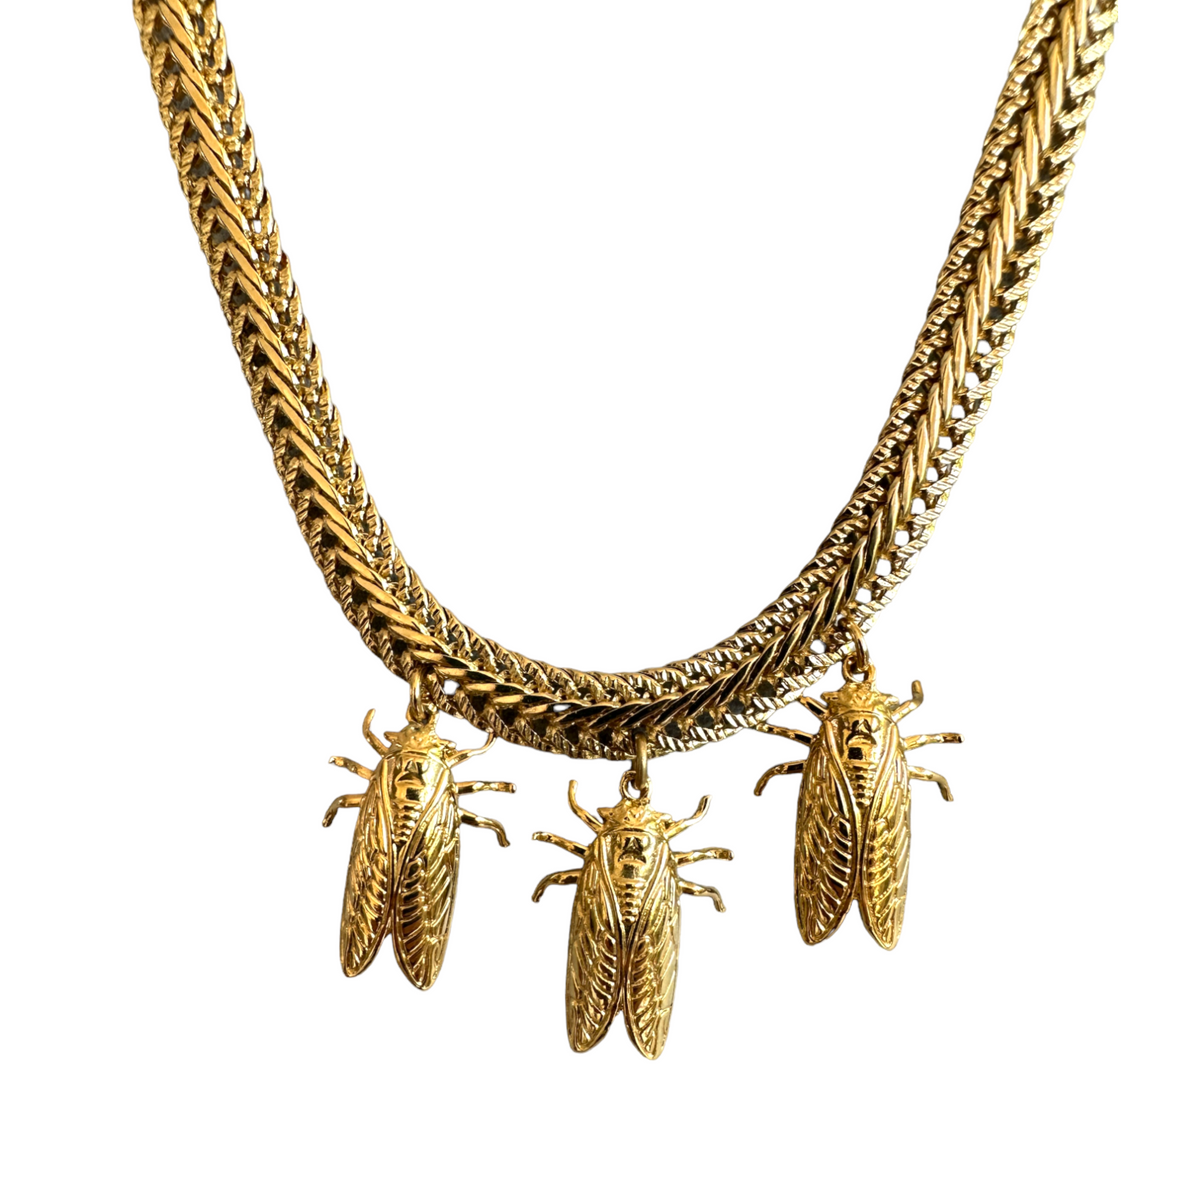 Buy The Gold Mesh Accent Necklace | JaeBee Jewelry